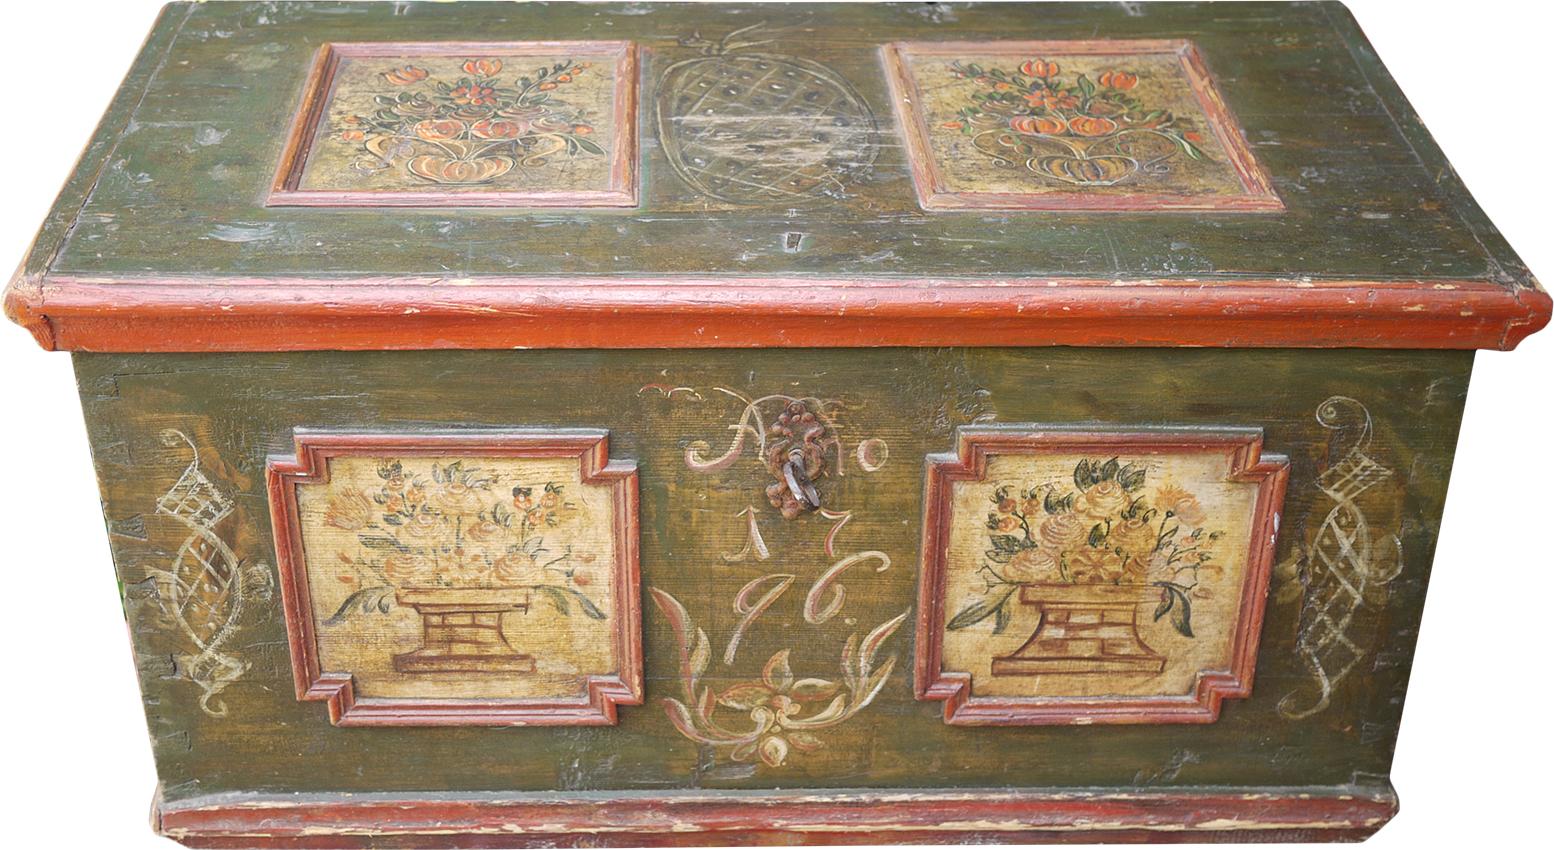 Northern Italian painted blanket chest

Ancient painted chest, dated 1796.
On the front, on the sides and on the floor there are six framed panels, containing cups and bouquets of flowers and fake marble motifs.
The background is forest green,